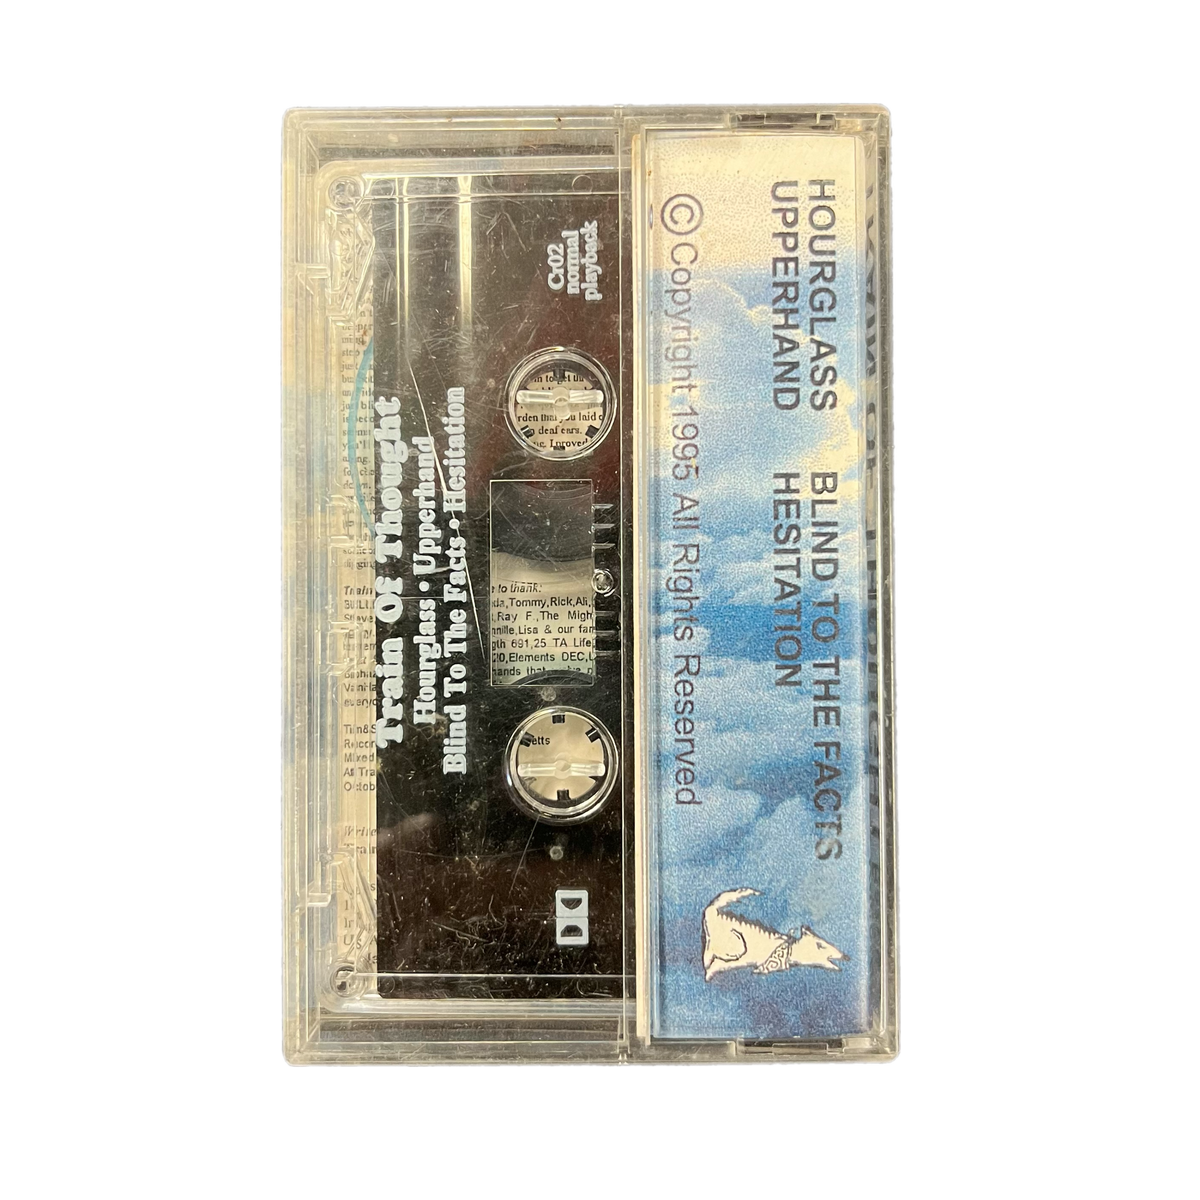 Vintage Train Of Thought &quot;Train Of Thought&quot; Cassette Tape